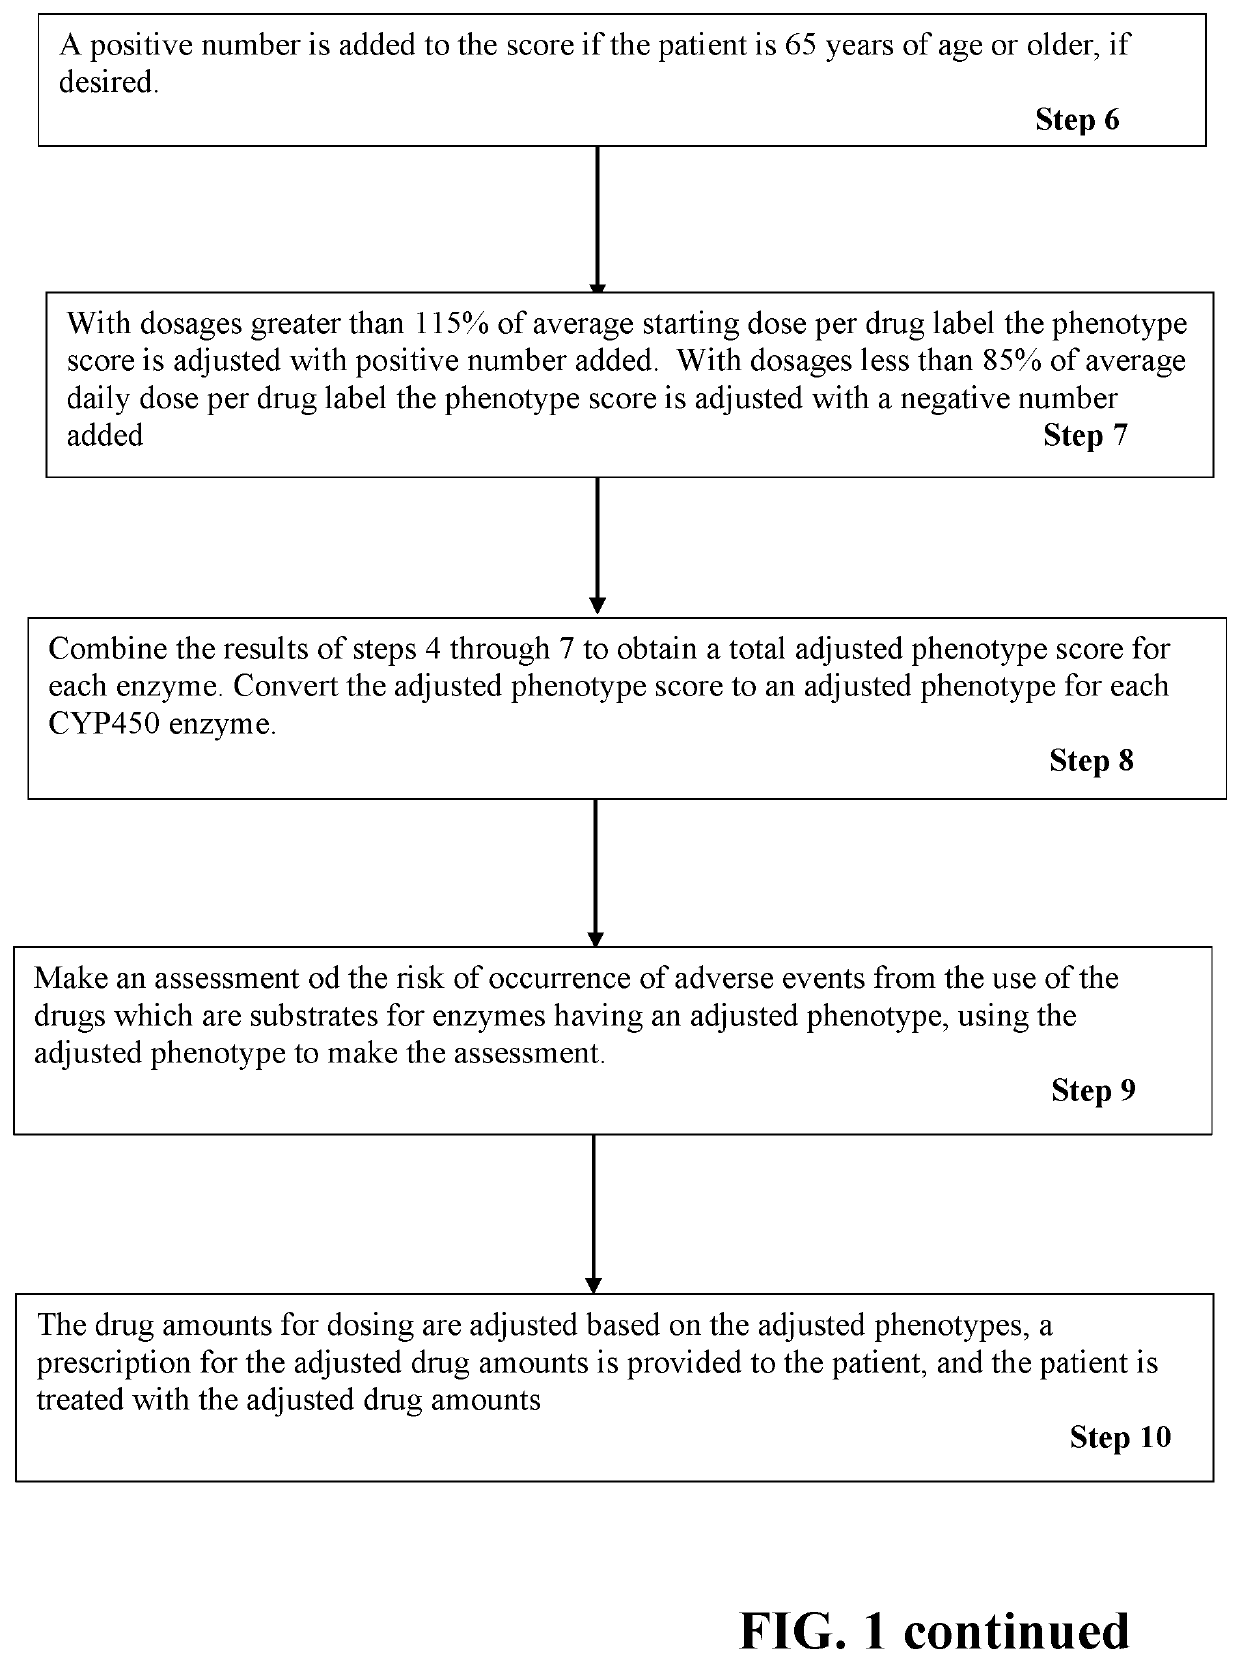 Method of Dosing a Patient with Multiple Drugs Using Adjusted Phenotypes of CYP450 Enzymes